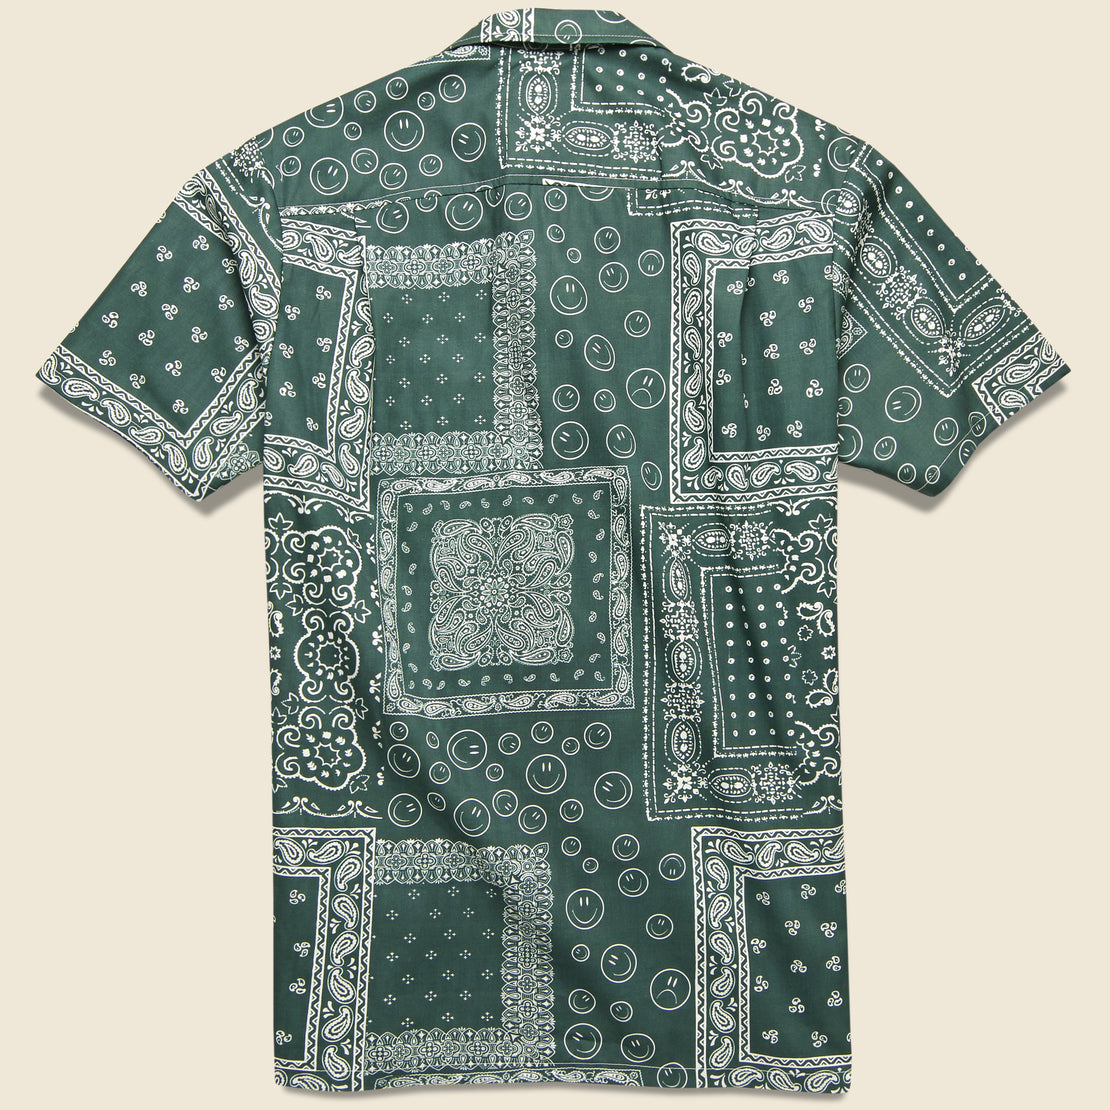 Bandana Button Up Shirt - Green - Bather - STAG Provisions - Tops - S/S Woven - Other Pattern